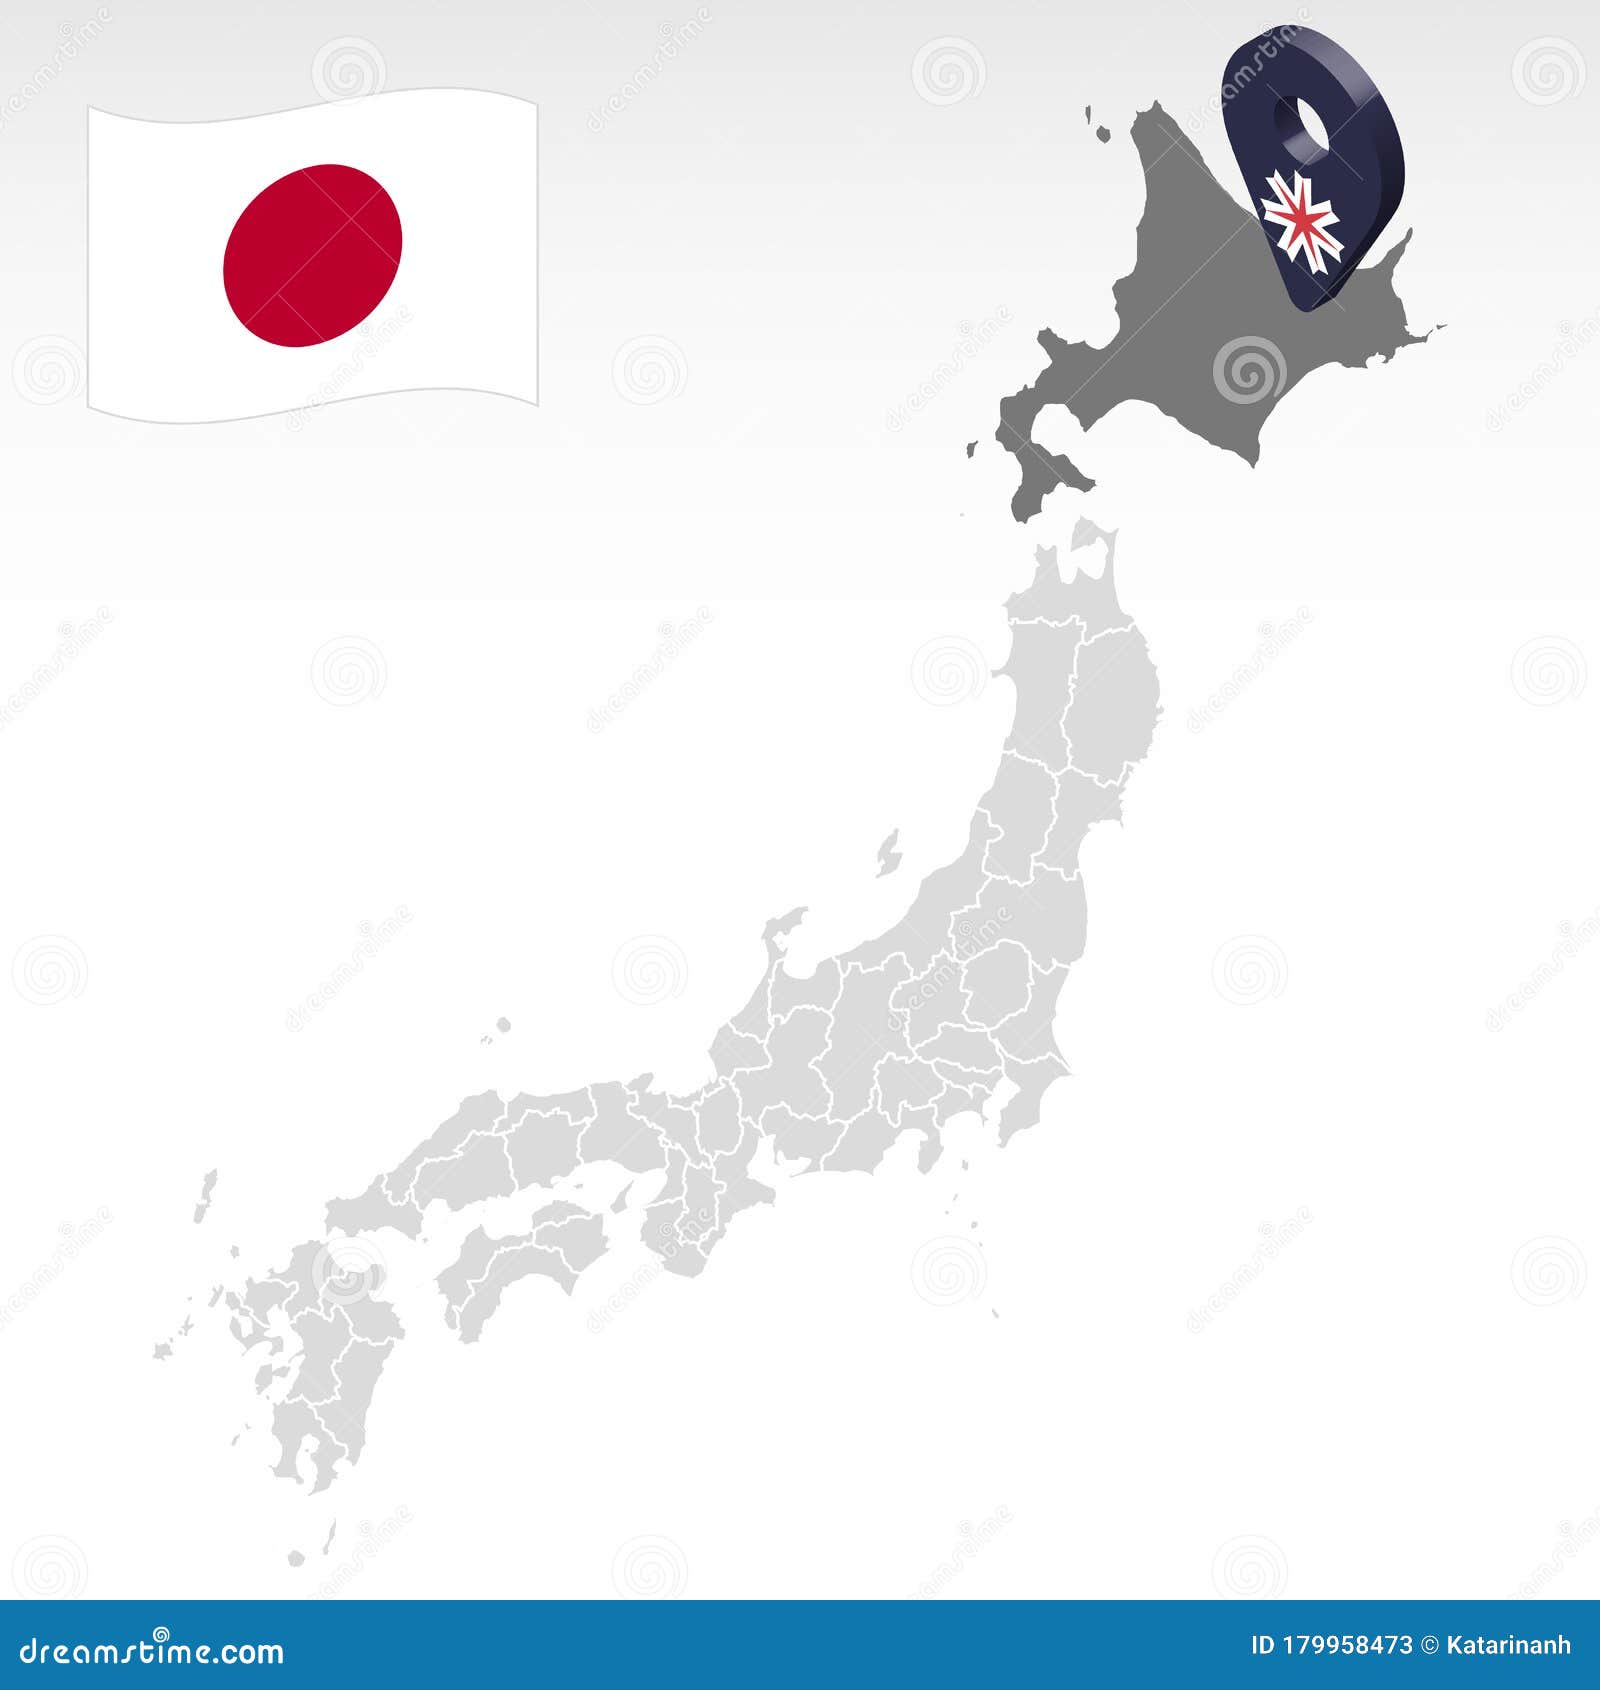 Location Of Prefecture Hokkaido On Map Italy 3d Hokkaido Location Sign Quality Map With Regions Of Japan For Your Web Site Desi Stock Vector Illustration Of Japan Nation 179958473